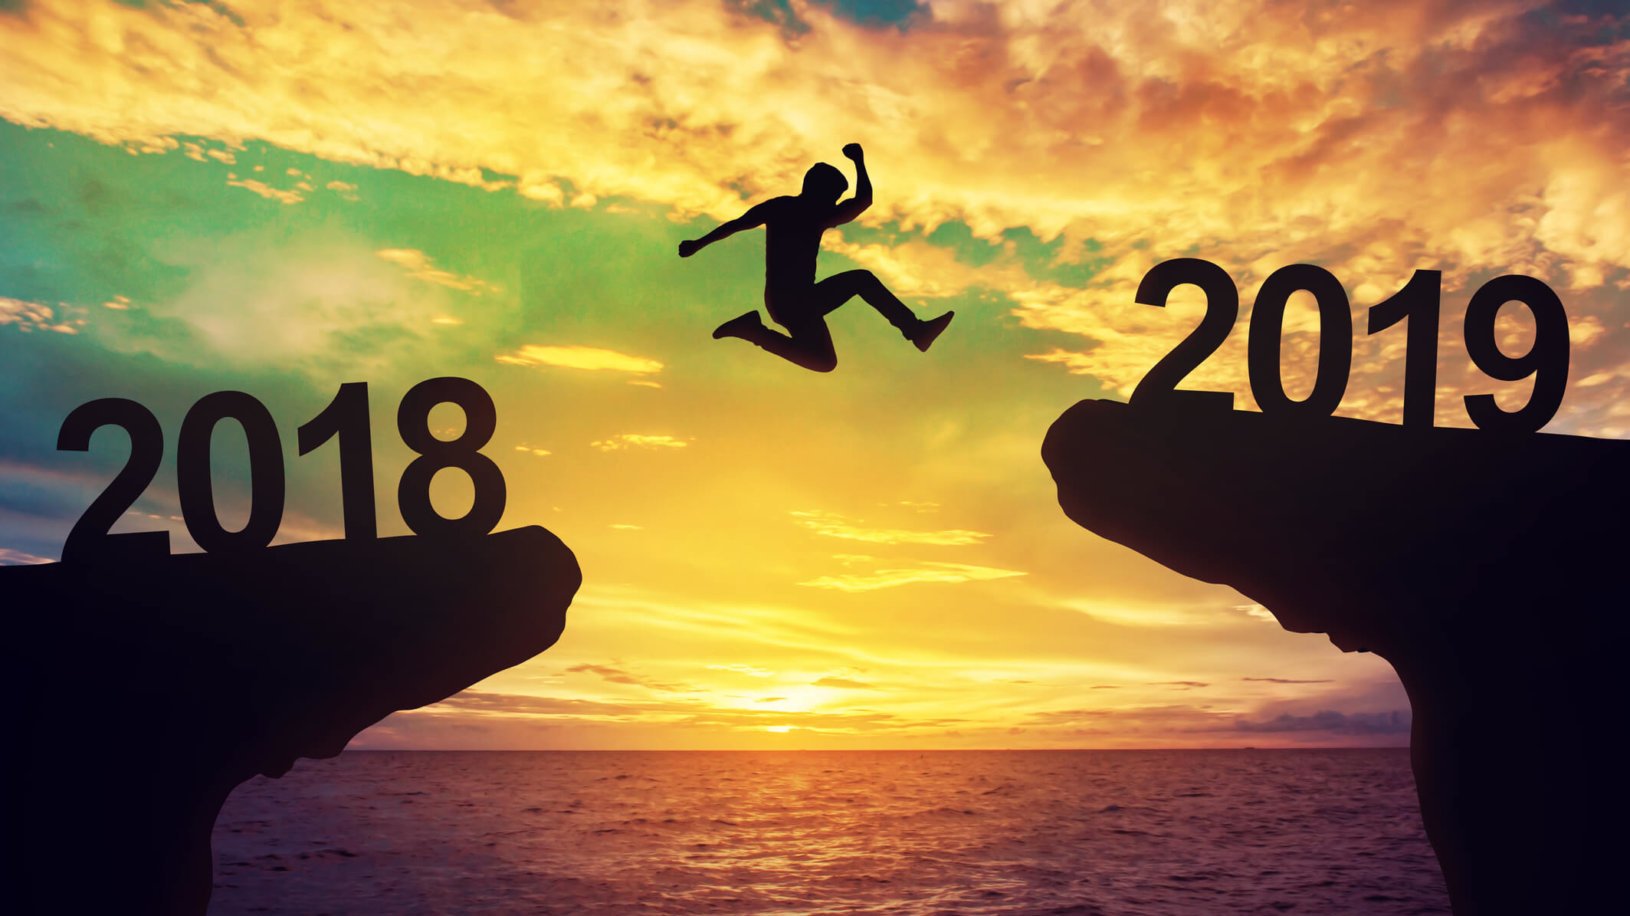 Man jumping from a ledge labeled 2018 to a ledge labeled 2019